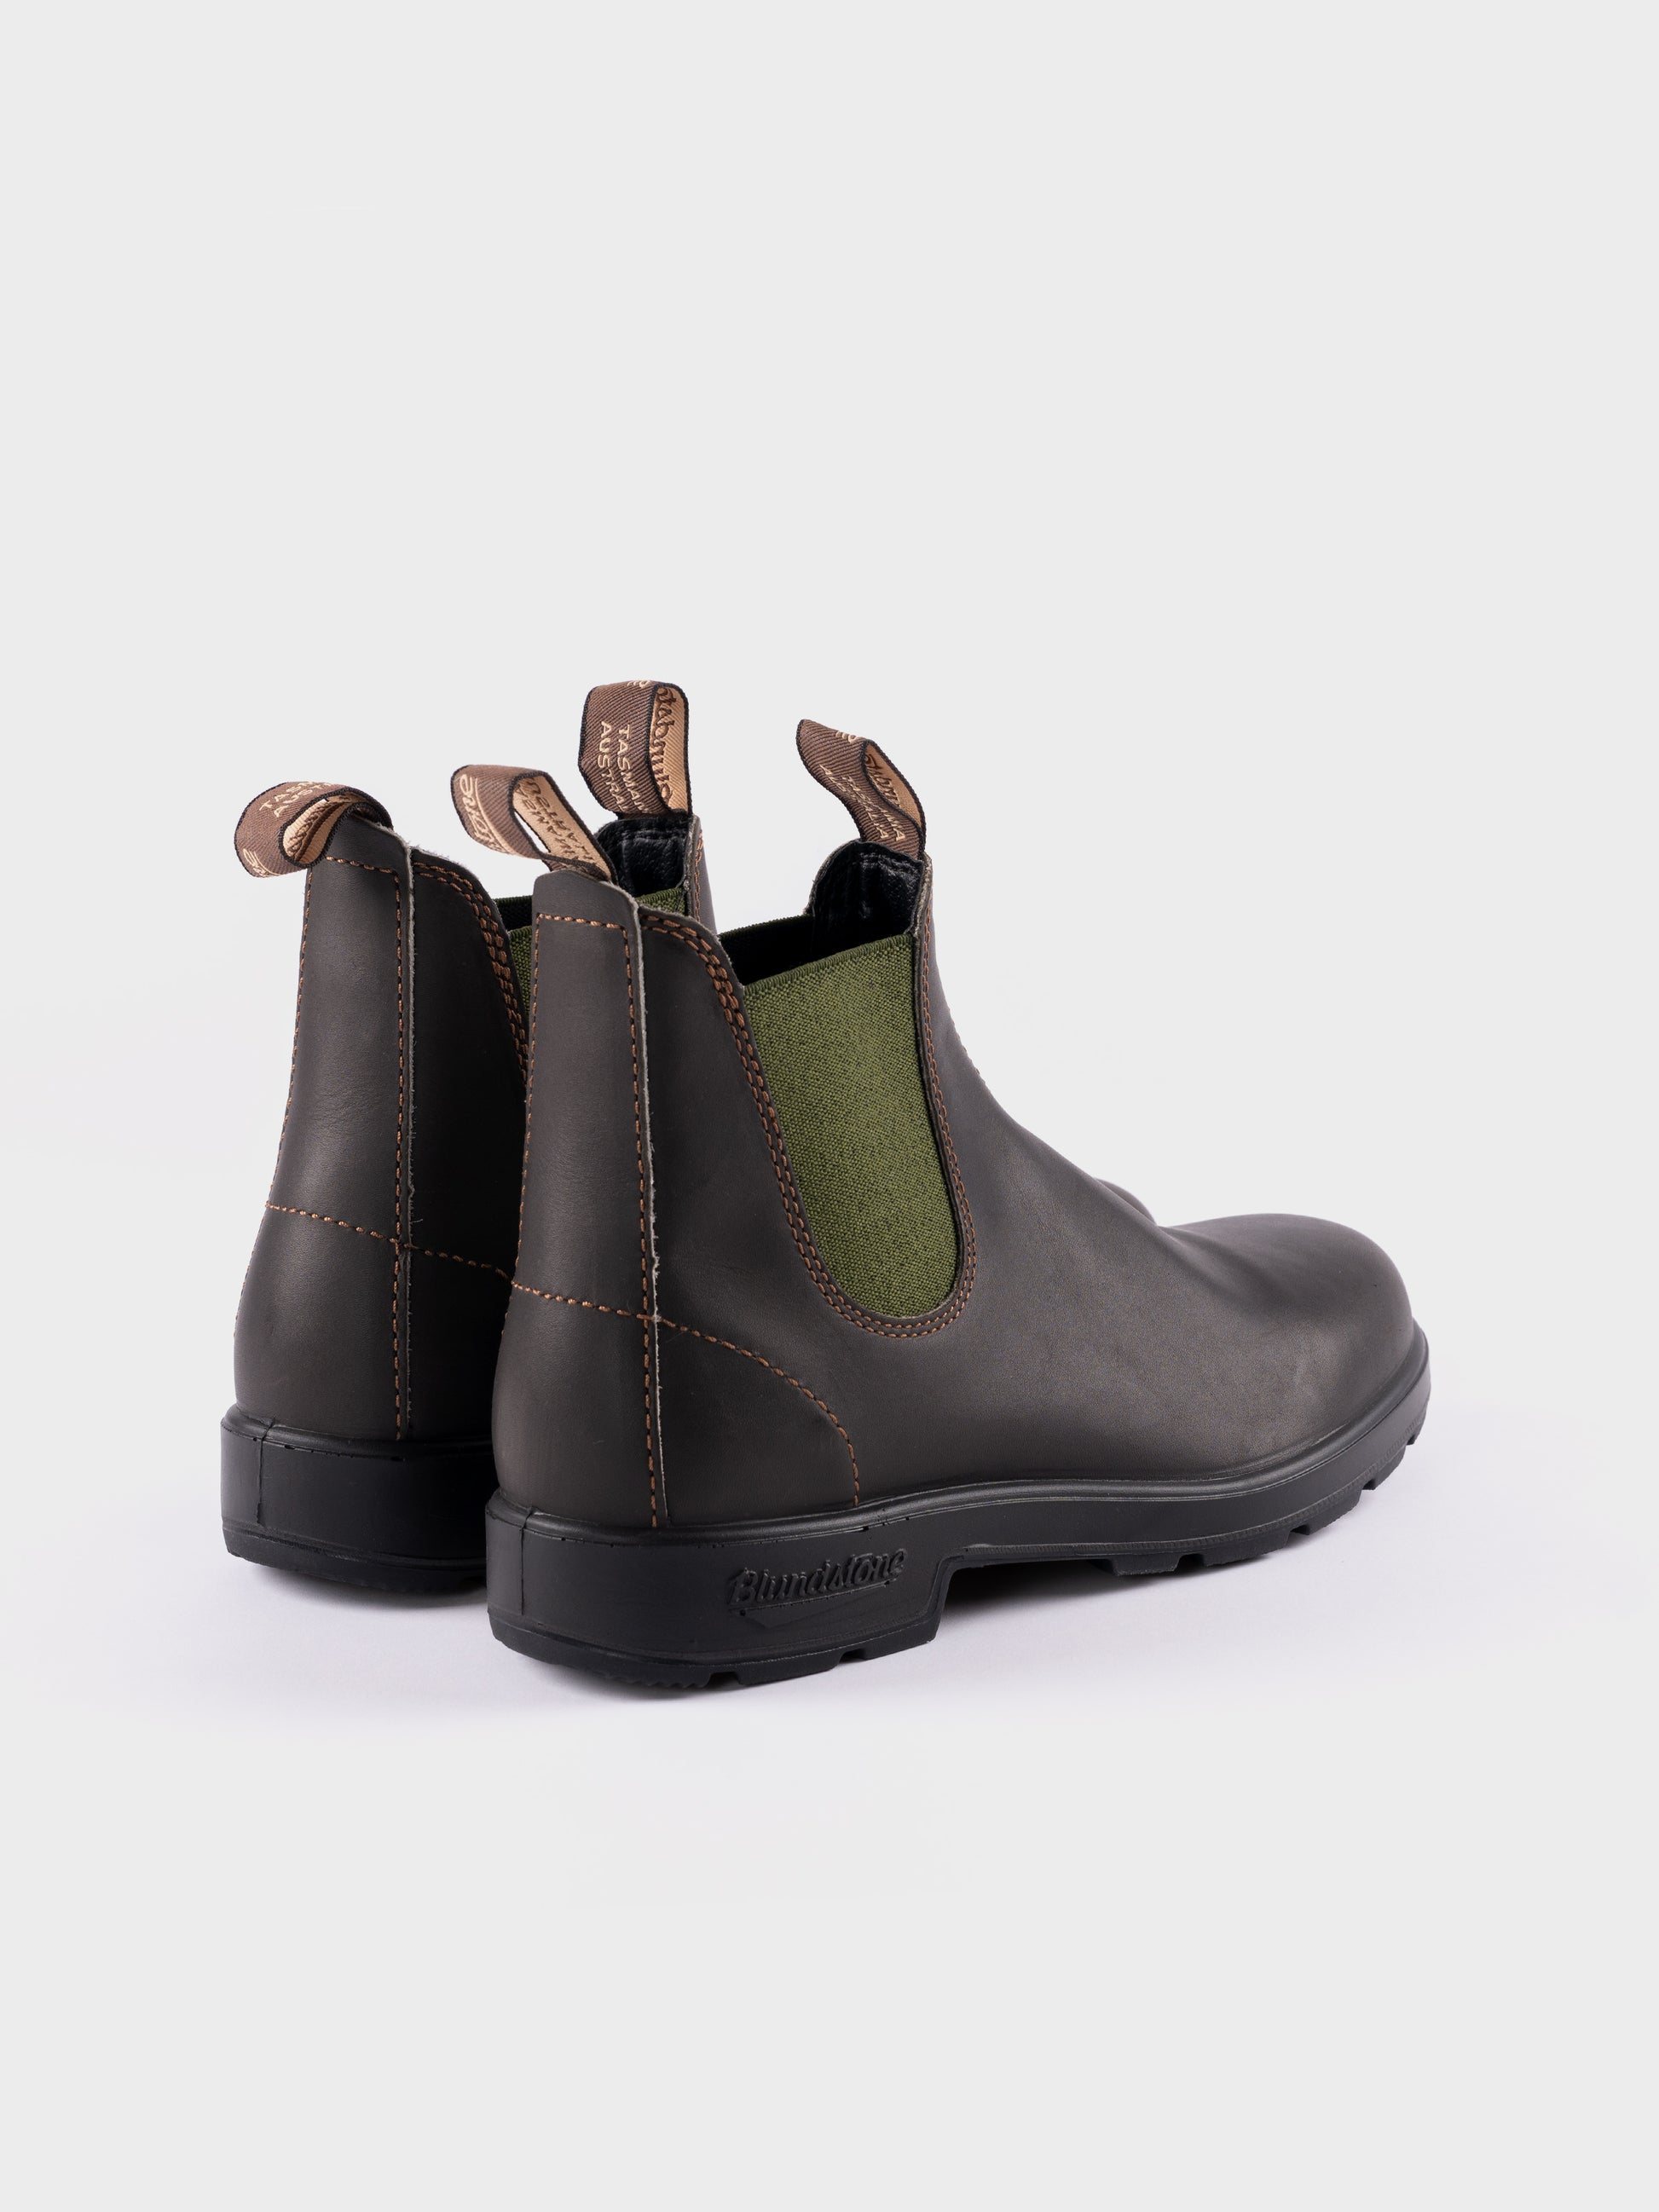 Blundstone Boots - 519 - Stout Olive Leather